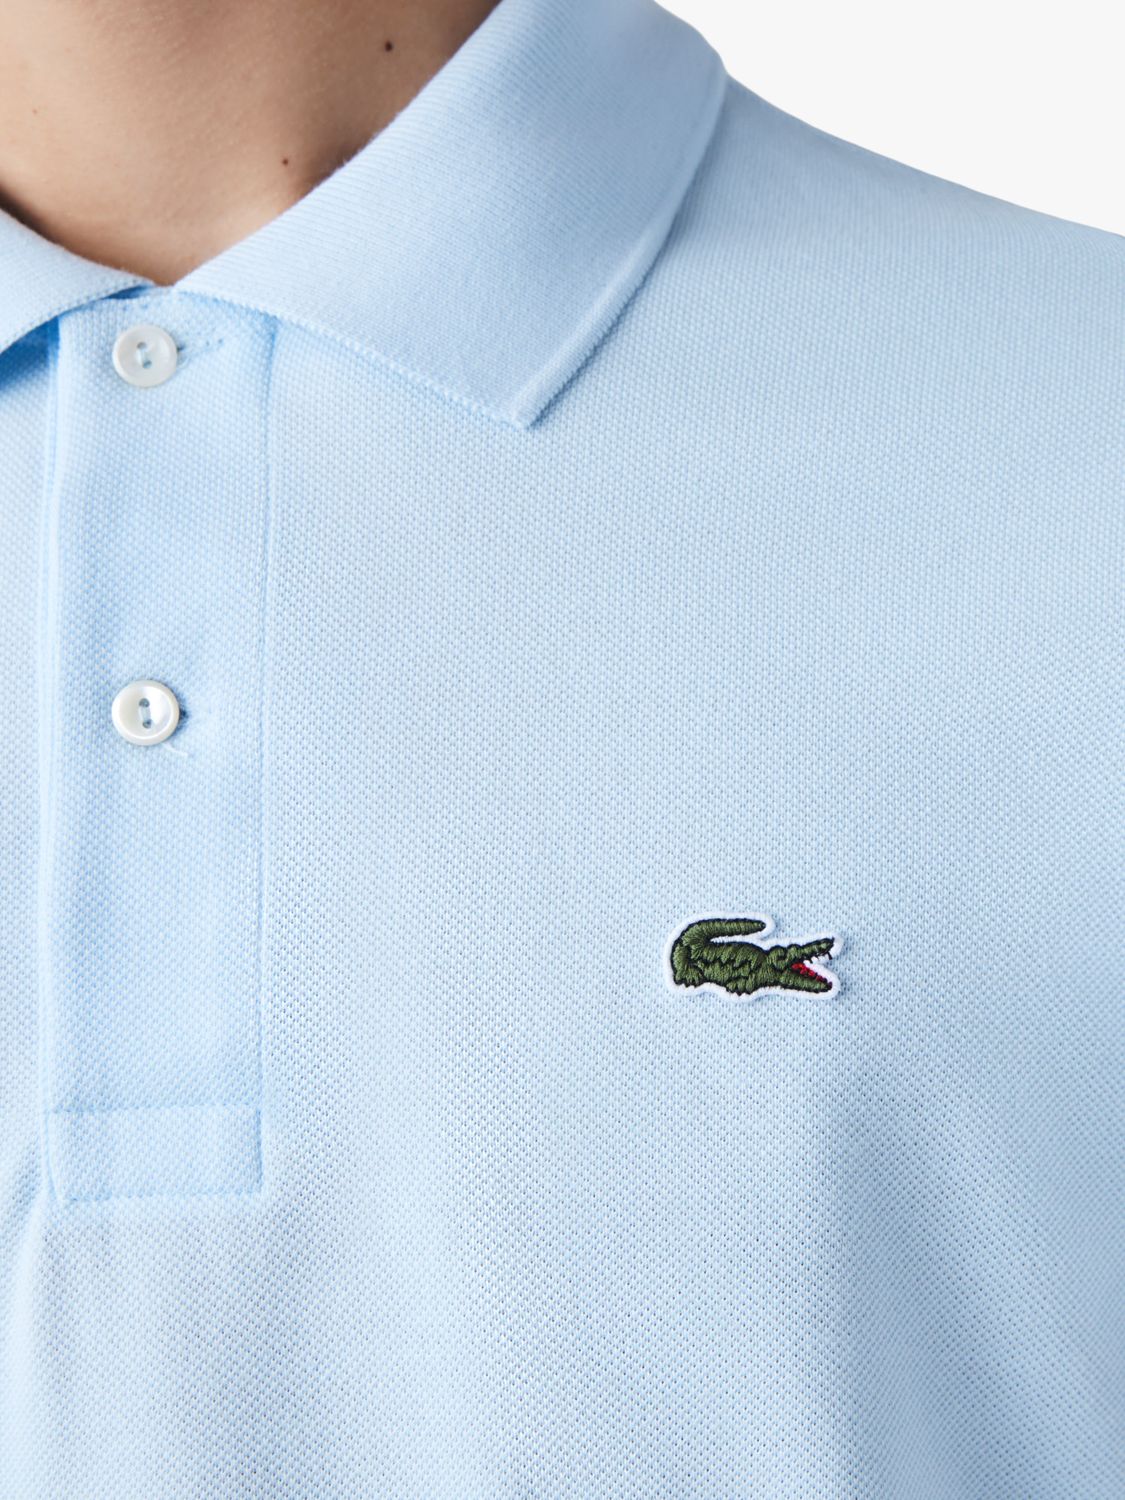 Lacoste Classic Fit Logo Polo Shirt, Blue, S